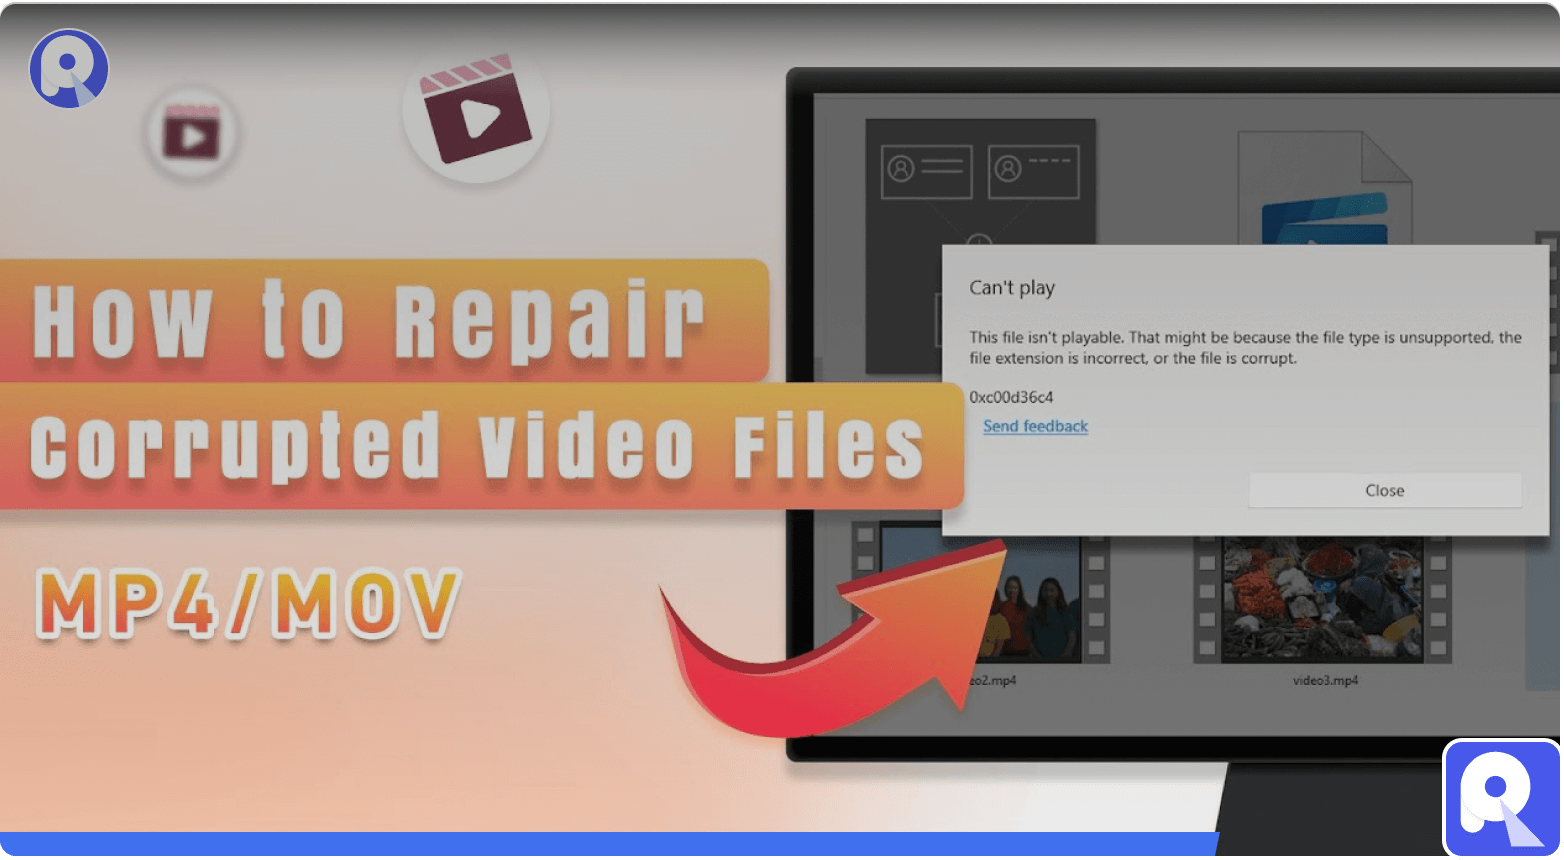 video guide about how to recover files deleted from recycle bin